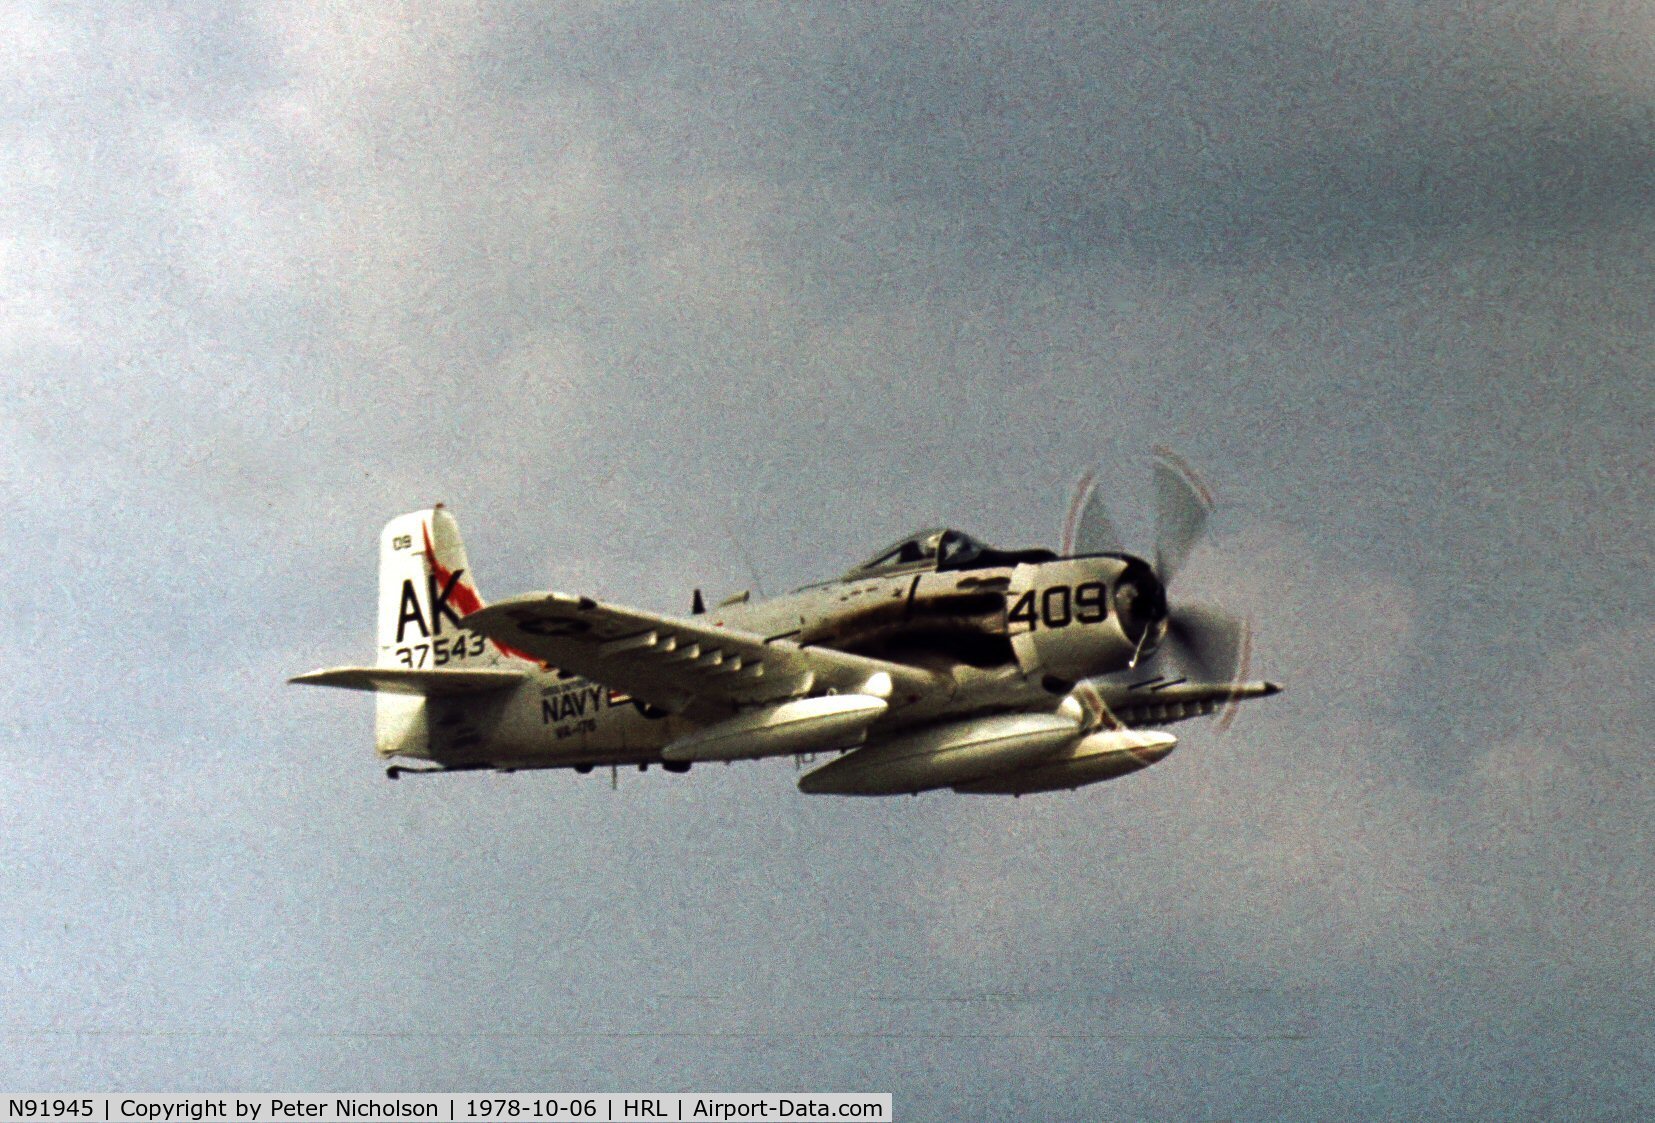 N91945, 1952 Douglas AD4-DW C/N 126882-SF85, A-1D Skyraider Bu. 126882 marked 137543 of VA-176 aboard USS Intrepid as displayed at the Confederate Air Force 1978 Airshow.